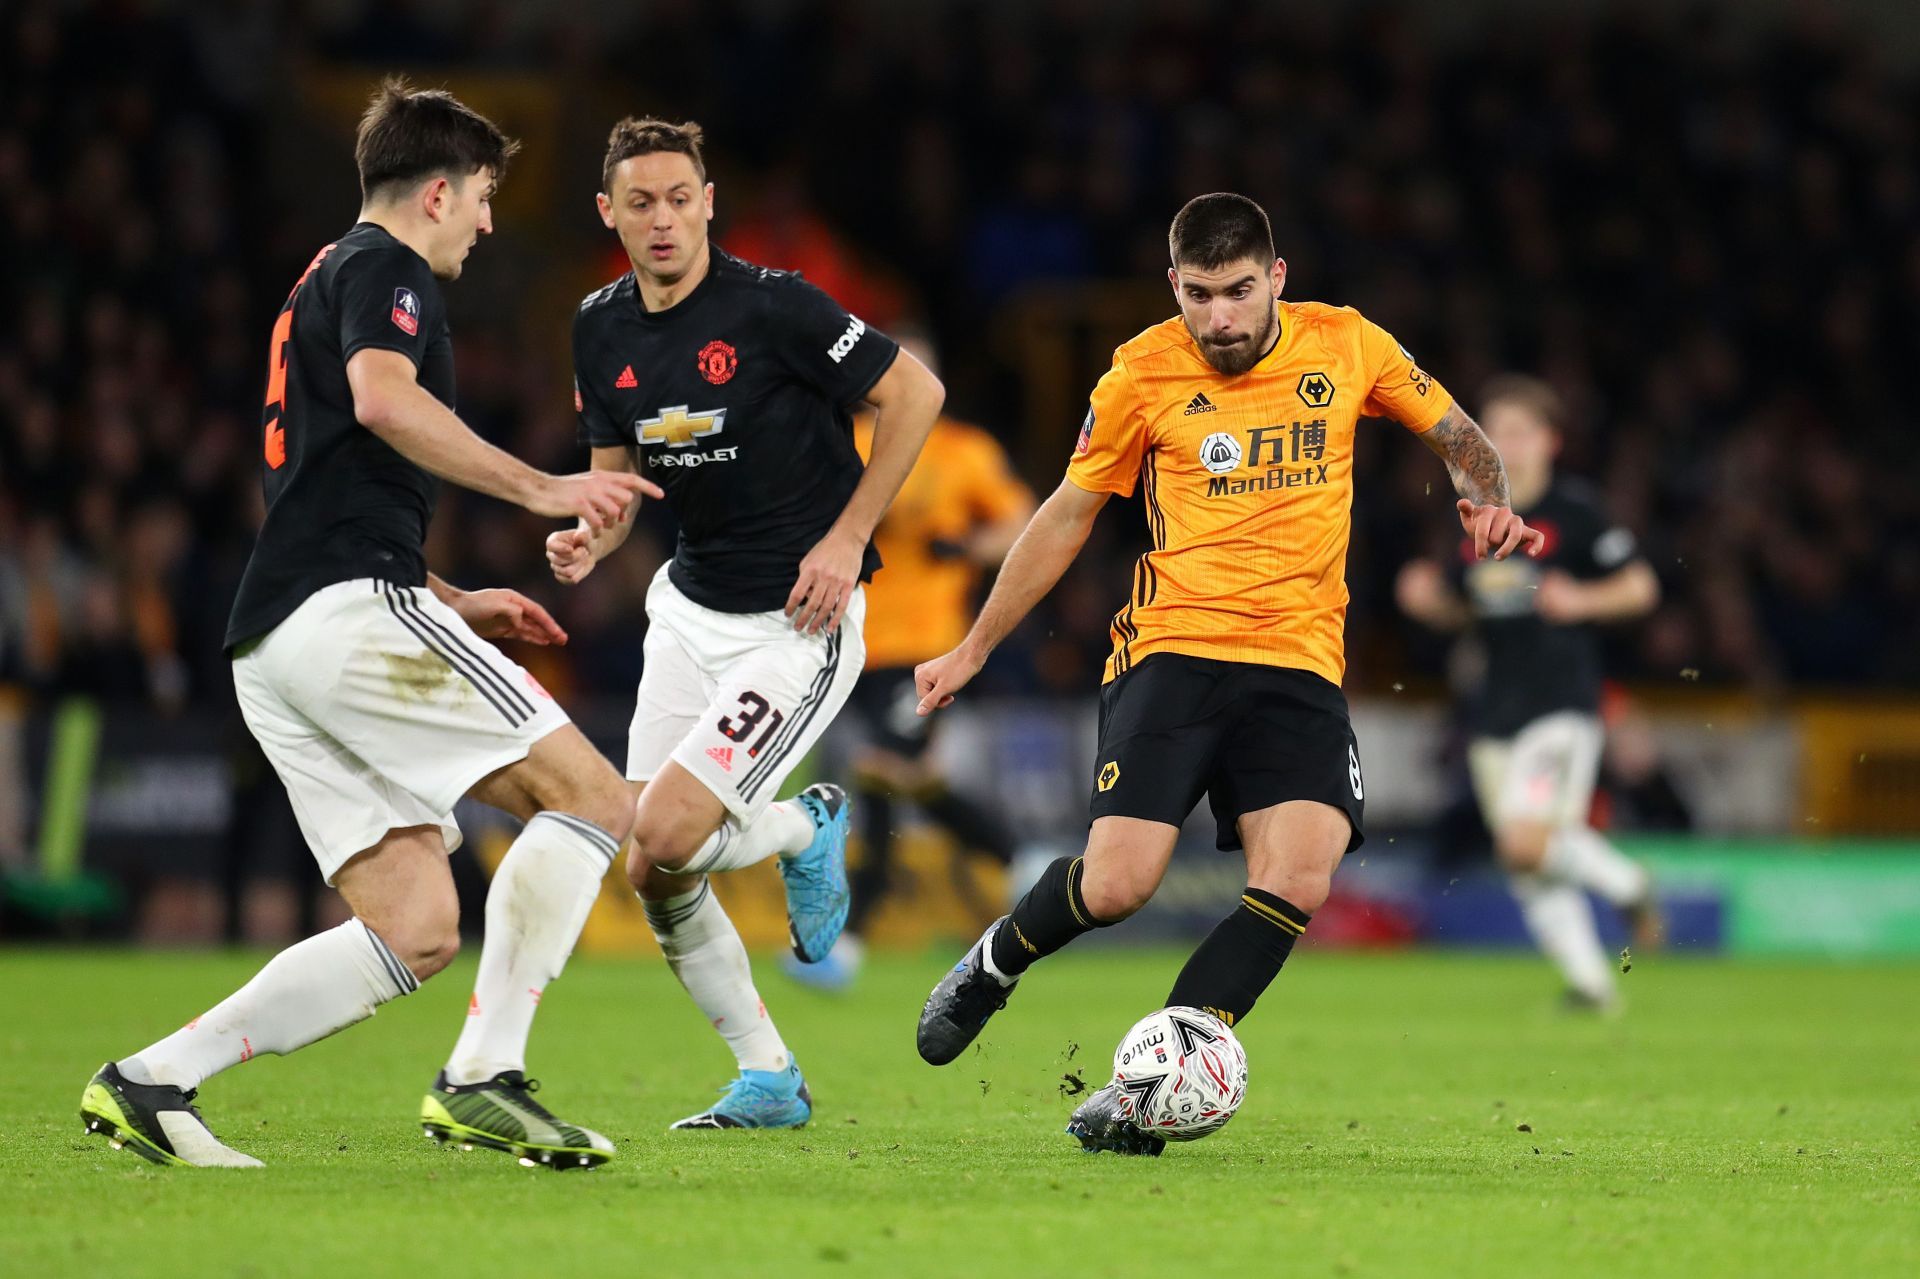 Could Ruben Neves (right) join Harry Maguire (left) and Nemanja Matic (#31) at Manchester United?